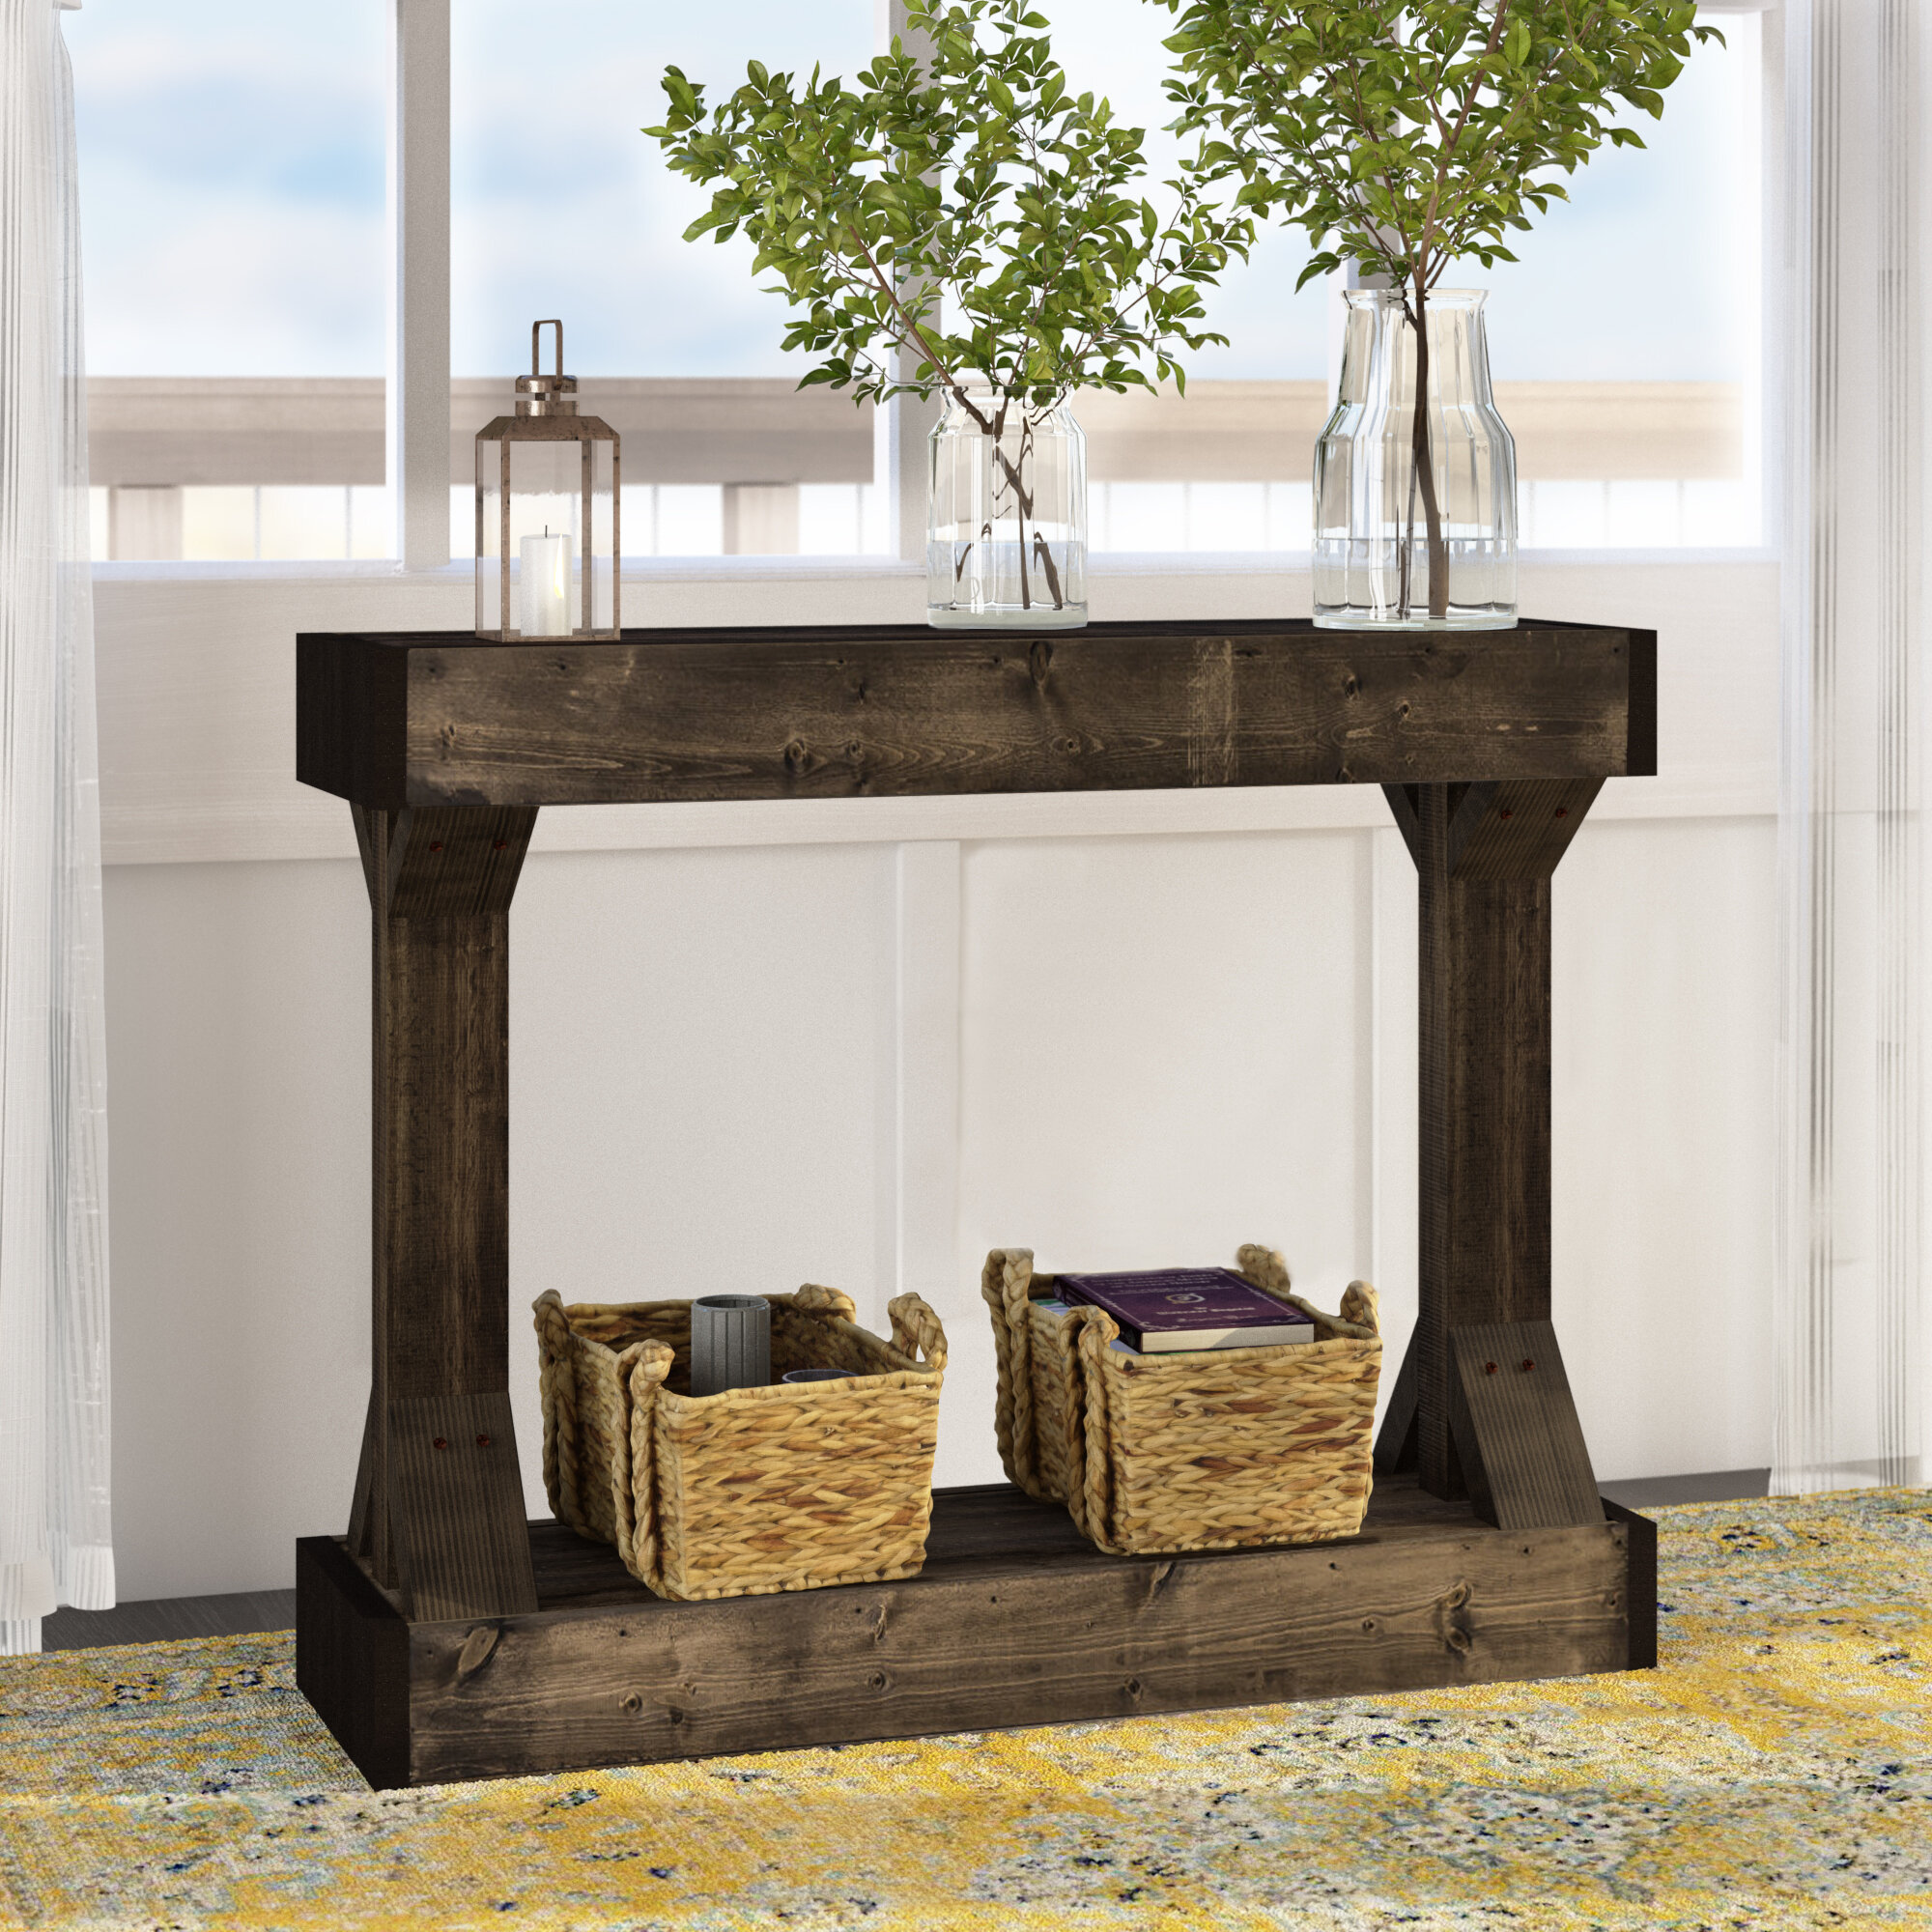 4 ft console table